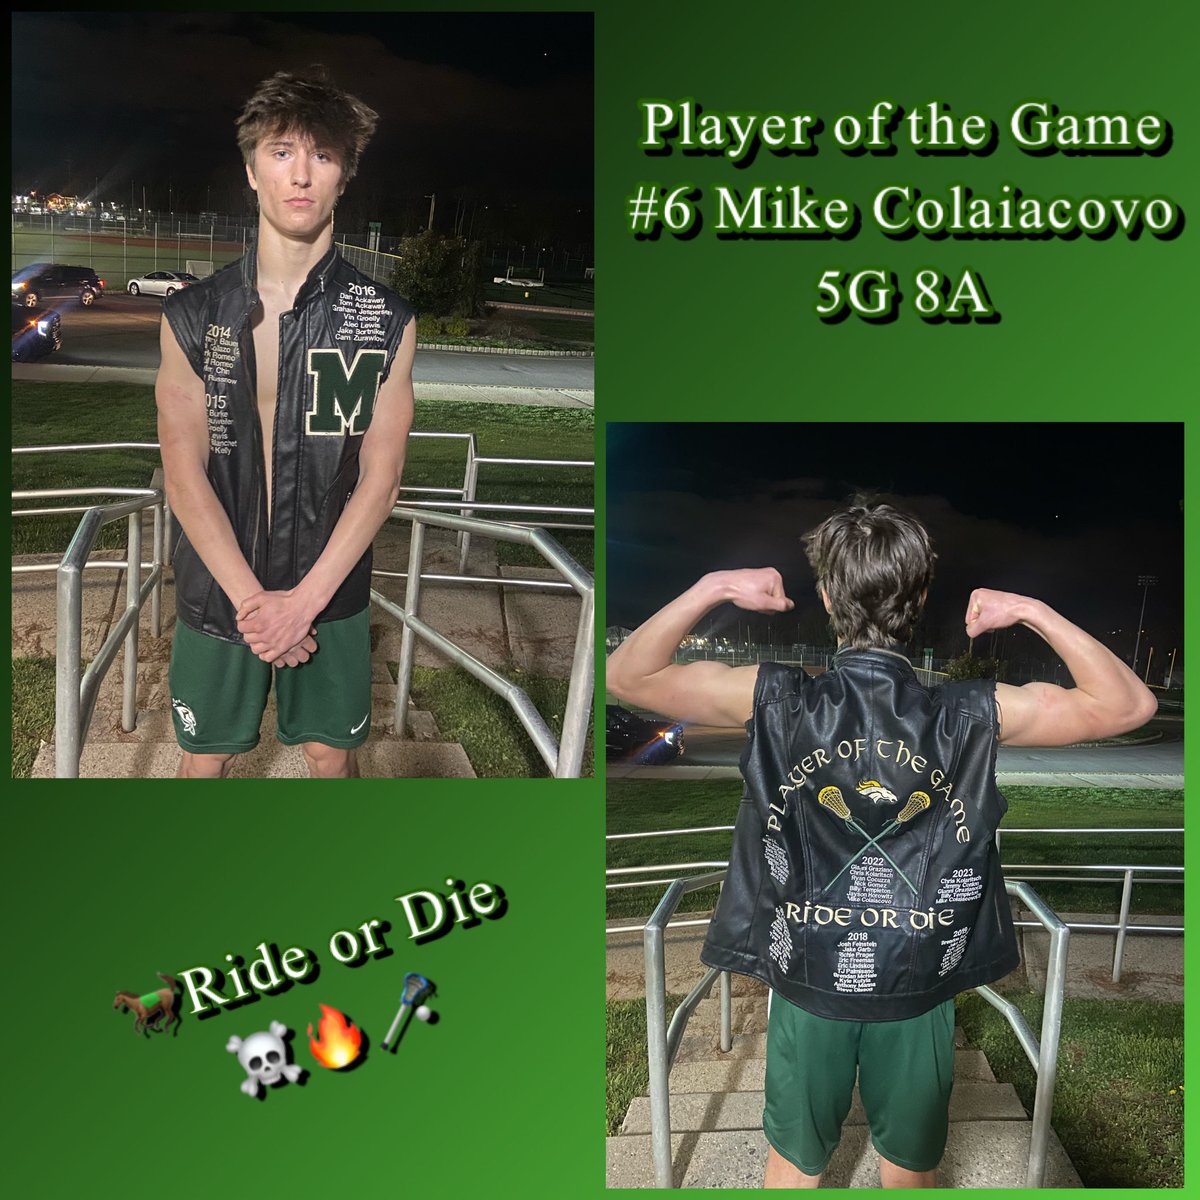 🐎With our victory over Roxbury 14-5 #6 Mike Colaiacovo @MichaelColaiac1 earns “The Vest” 5G 8A - Let’s Go!!-Ride or Die ☠️🔥🥍 @MustangsMTHS @bigstatesports @MontvilleTAP @dailyrecordspts @MontvilleTwpSch @MTHSStampede @MTHSAthBoosters @AllinonHSSports @MikeKinneyHS @MikeGurnis